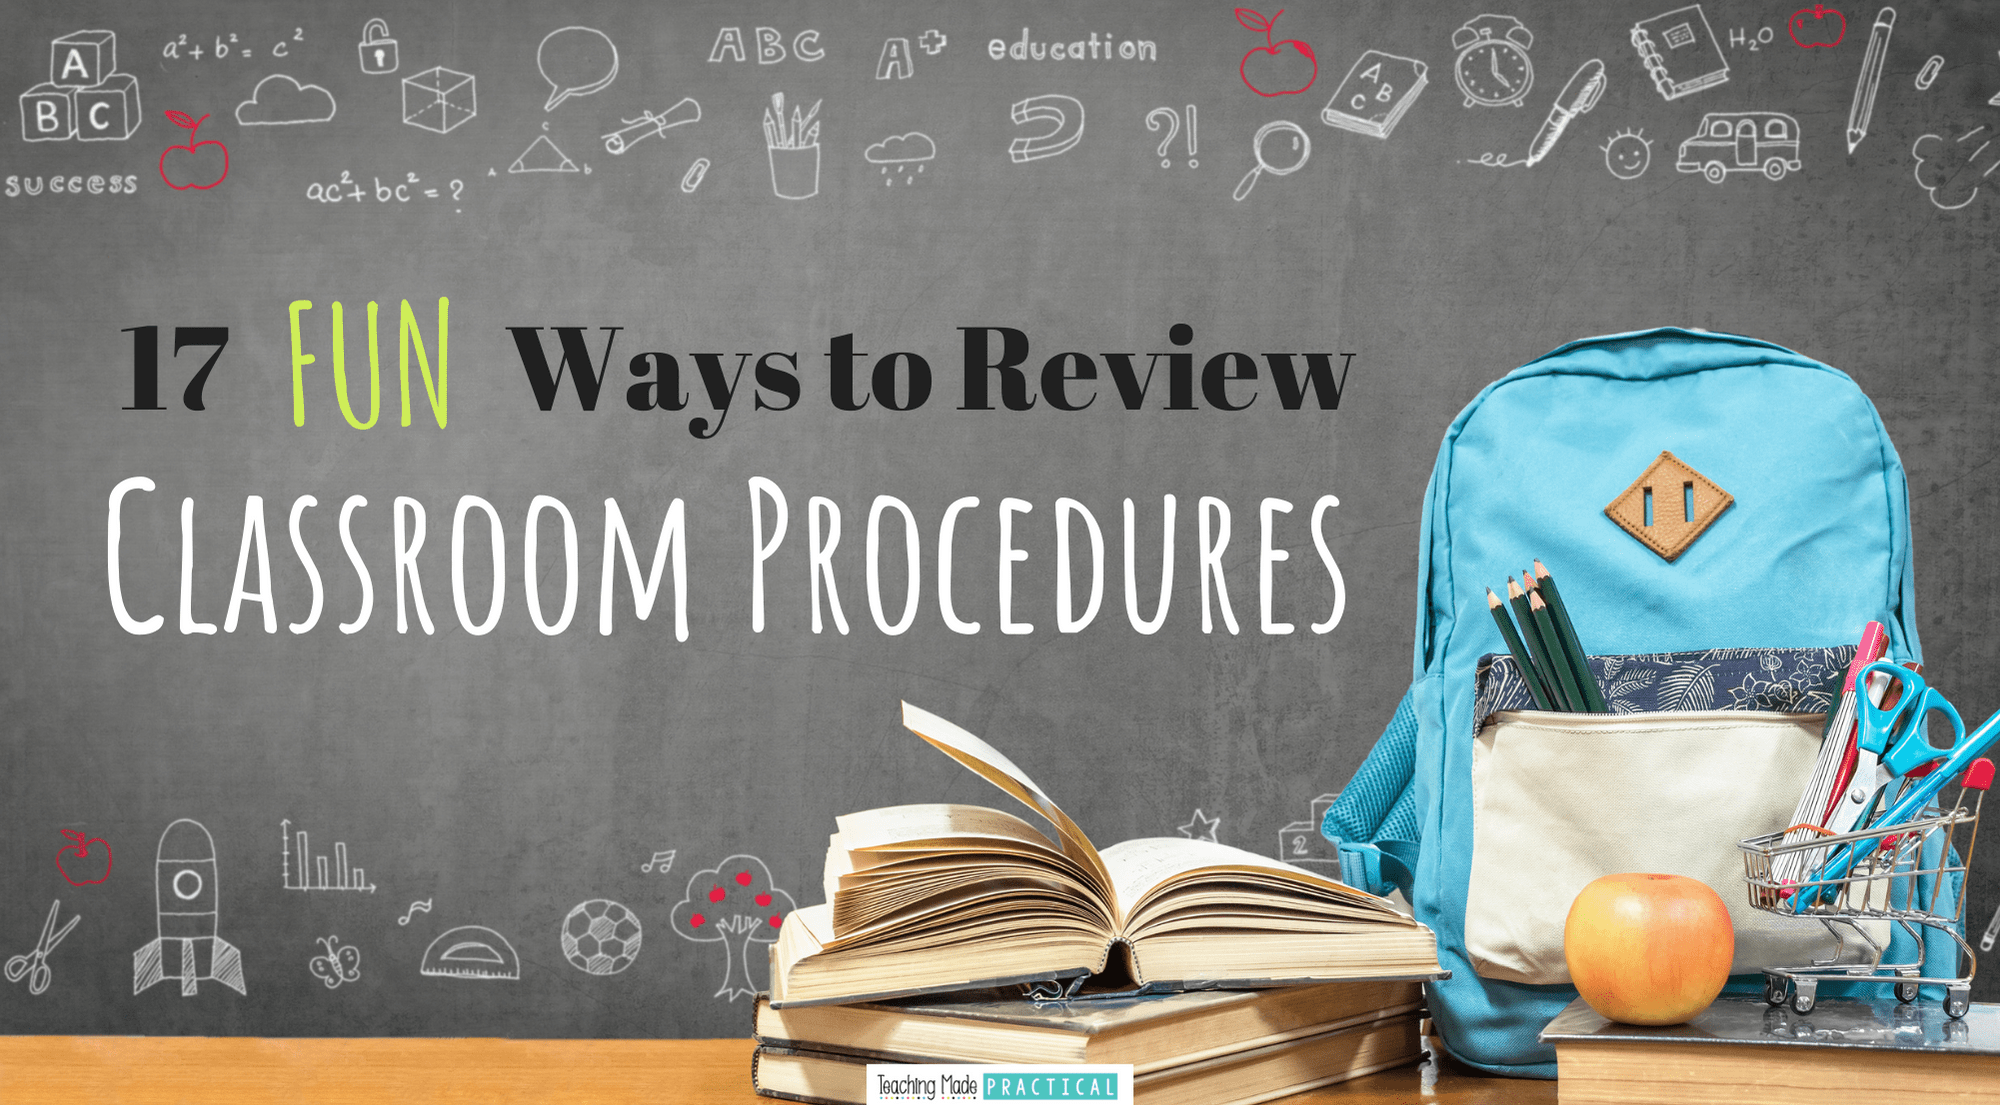 17 fun ways to review procedures with your upper elementary students